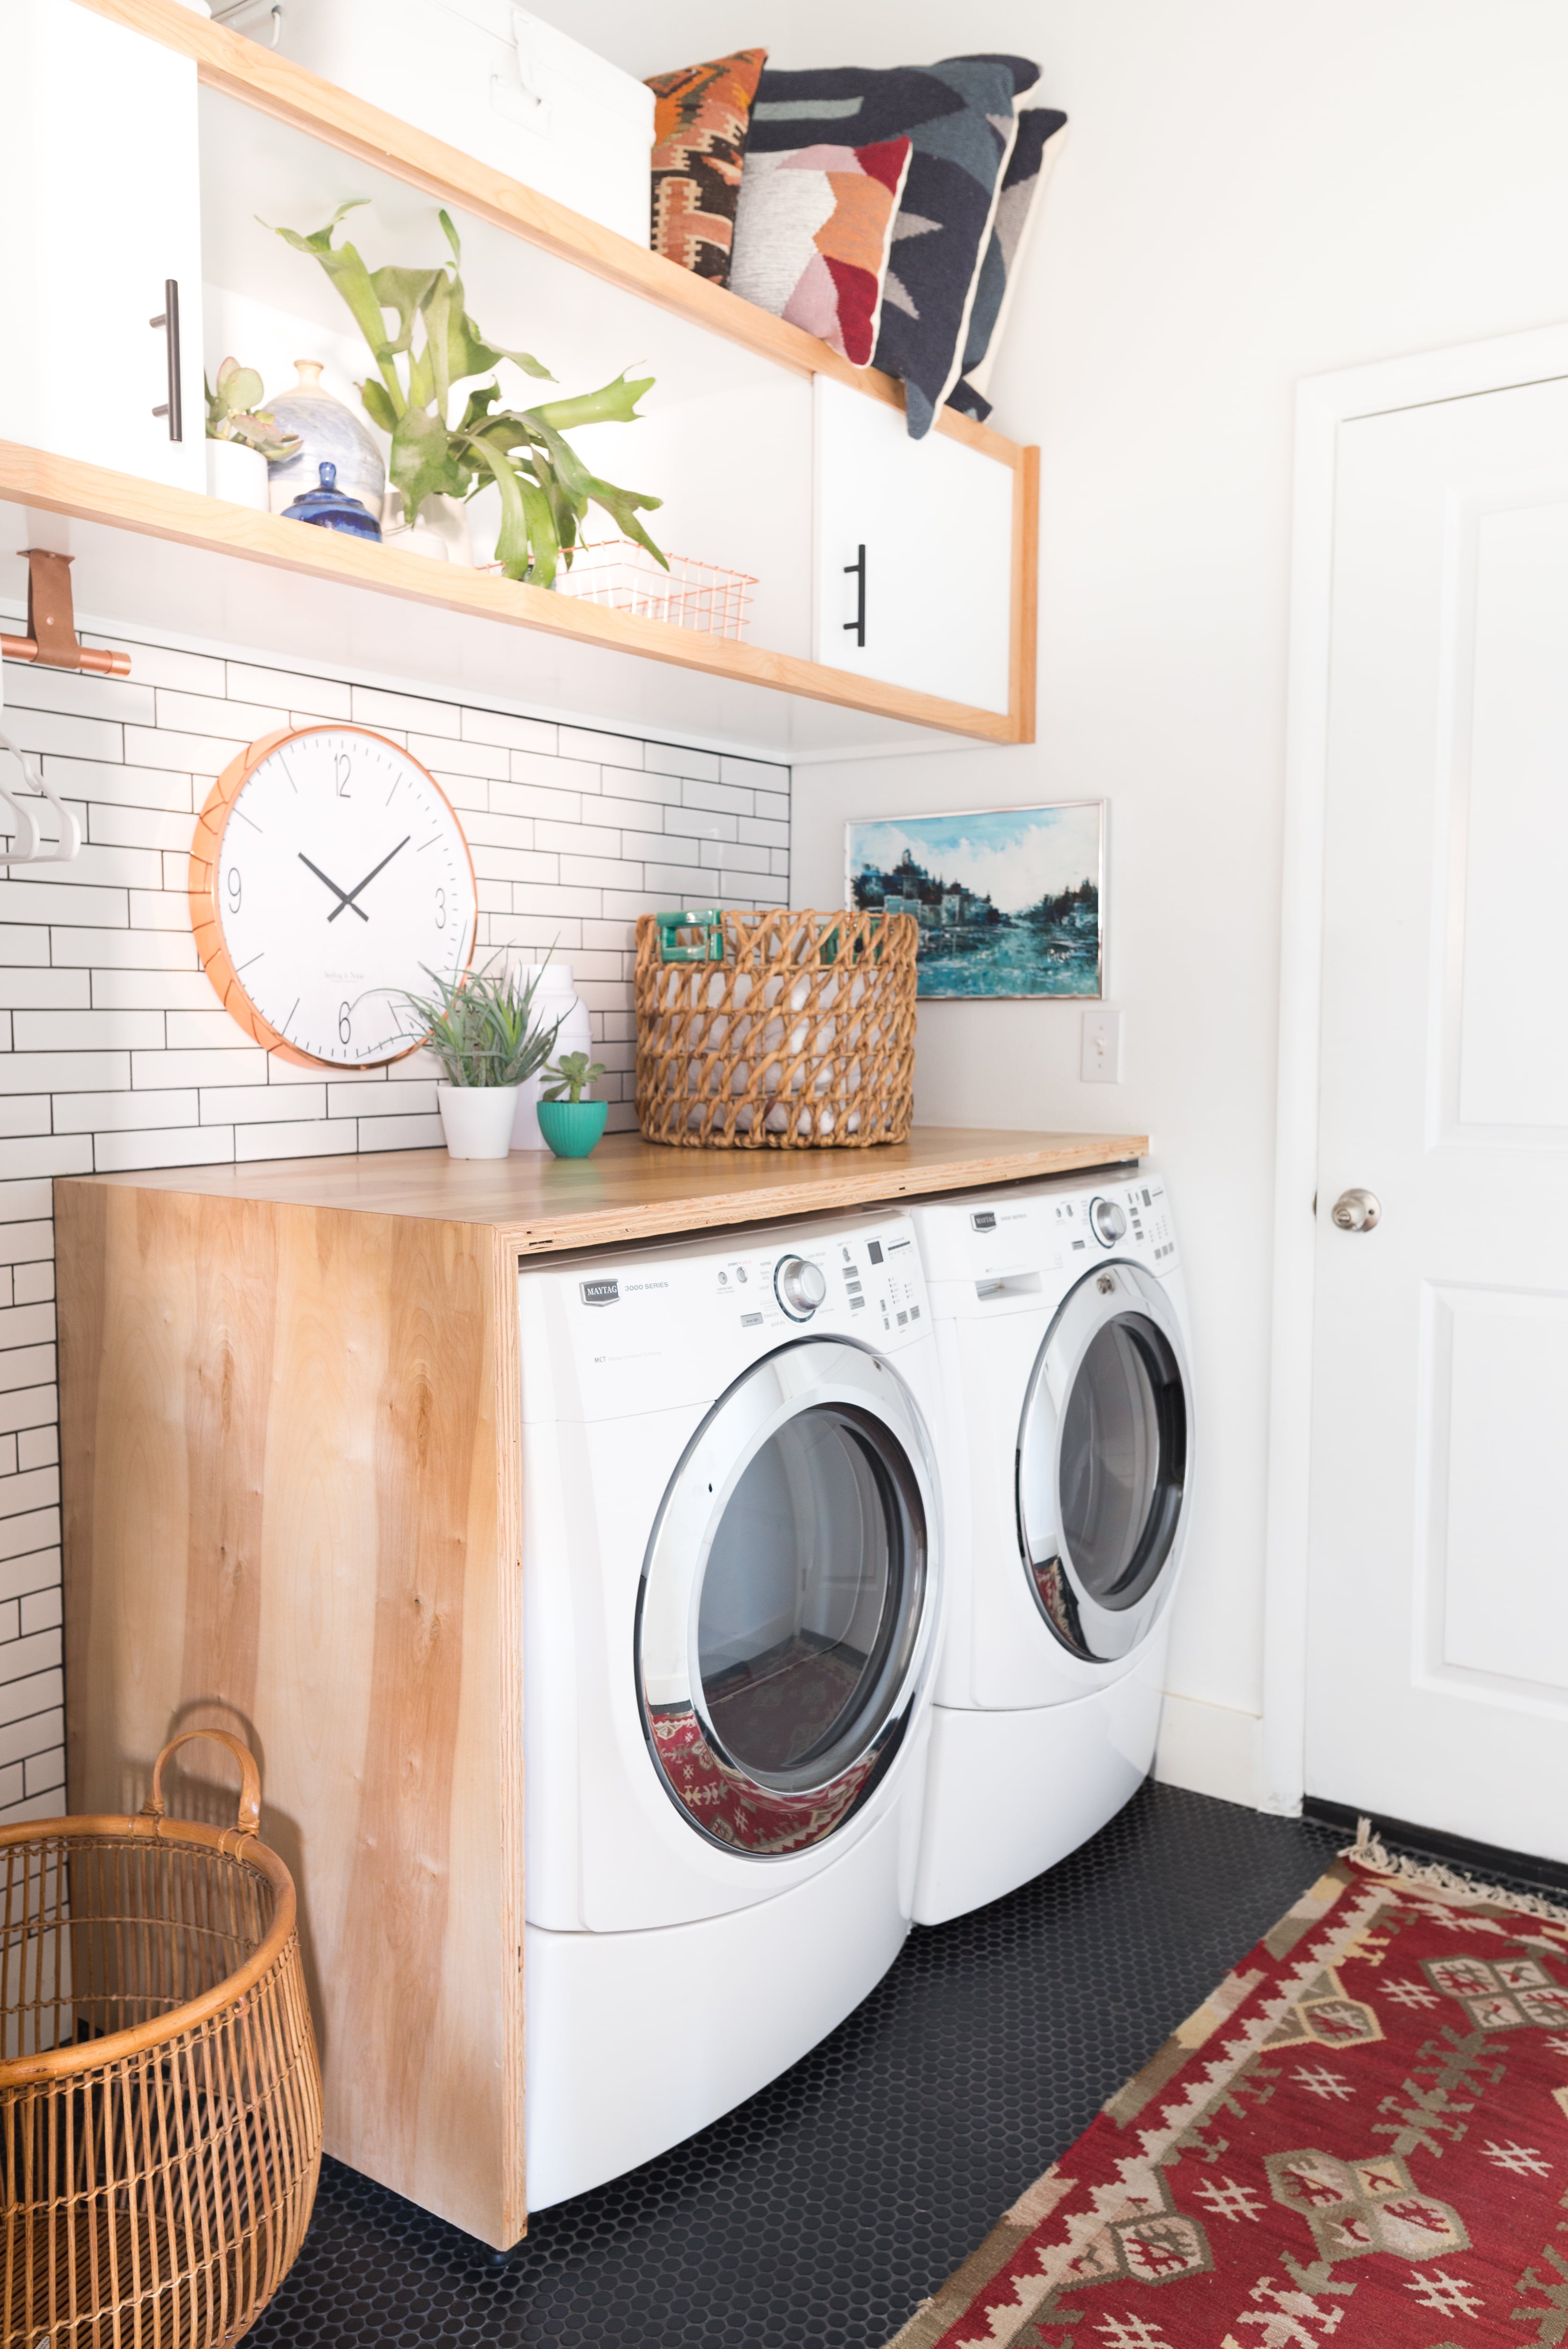 10 Laundry Room Countertop Ideas That You'll Love